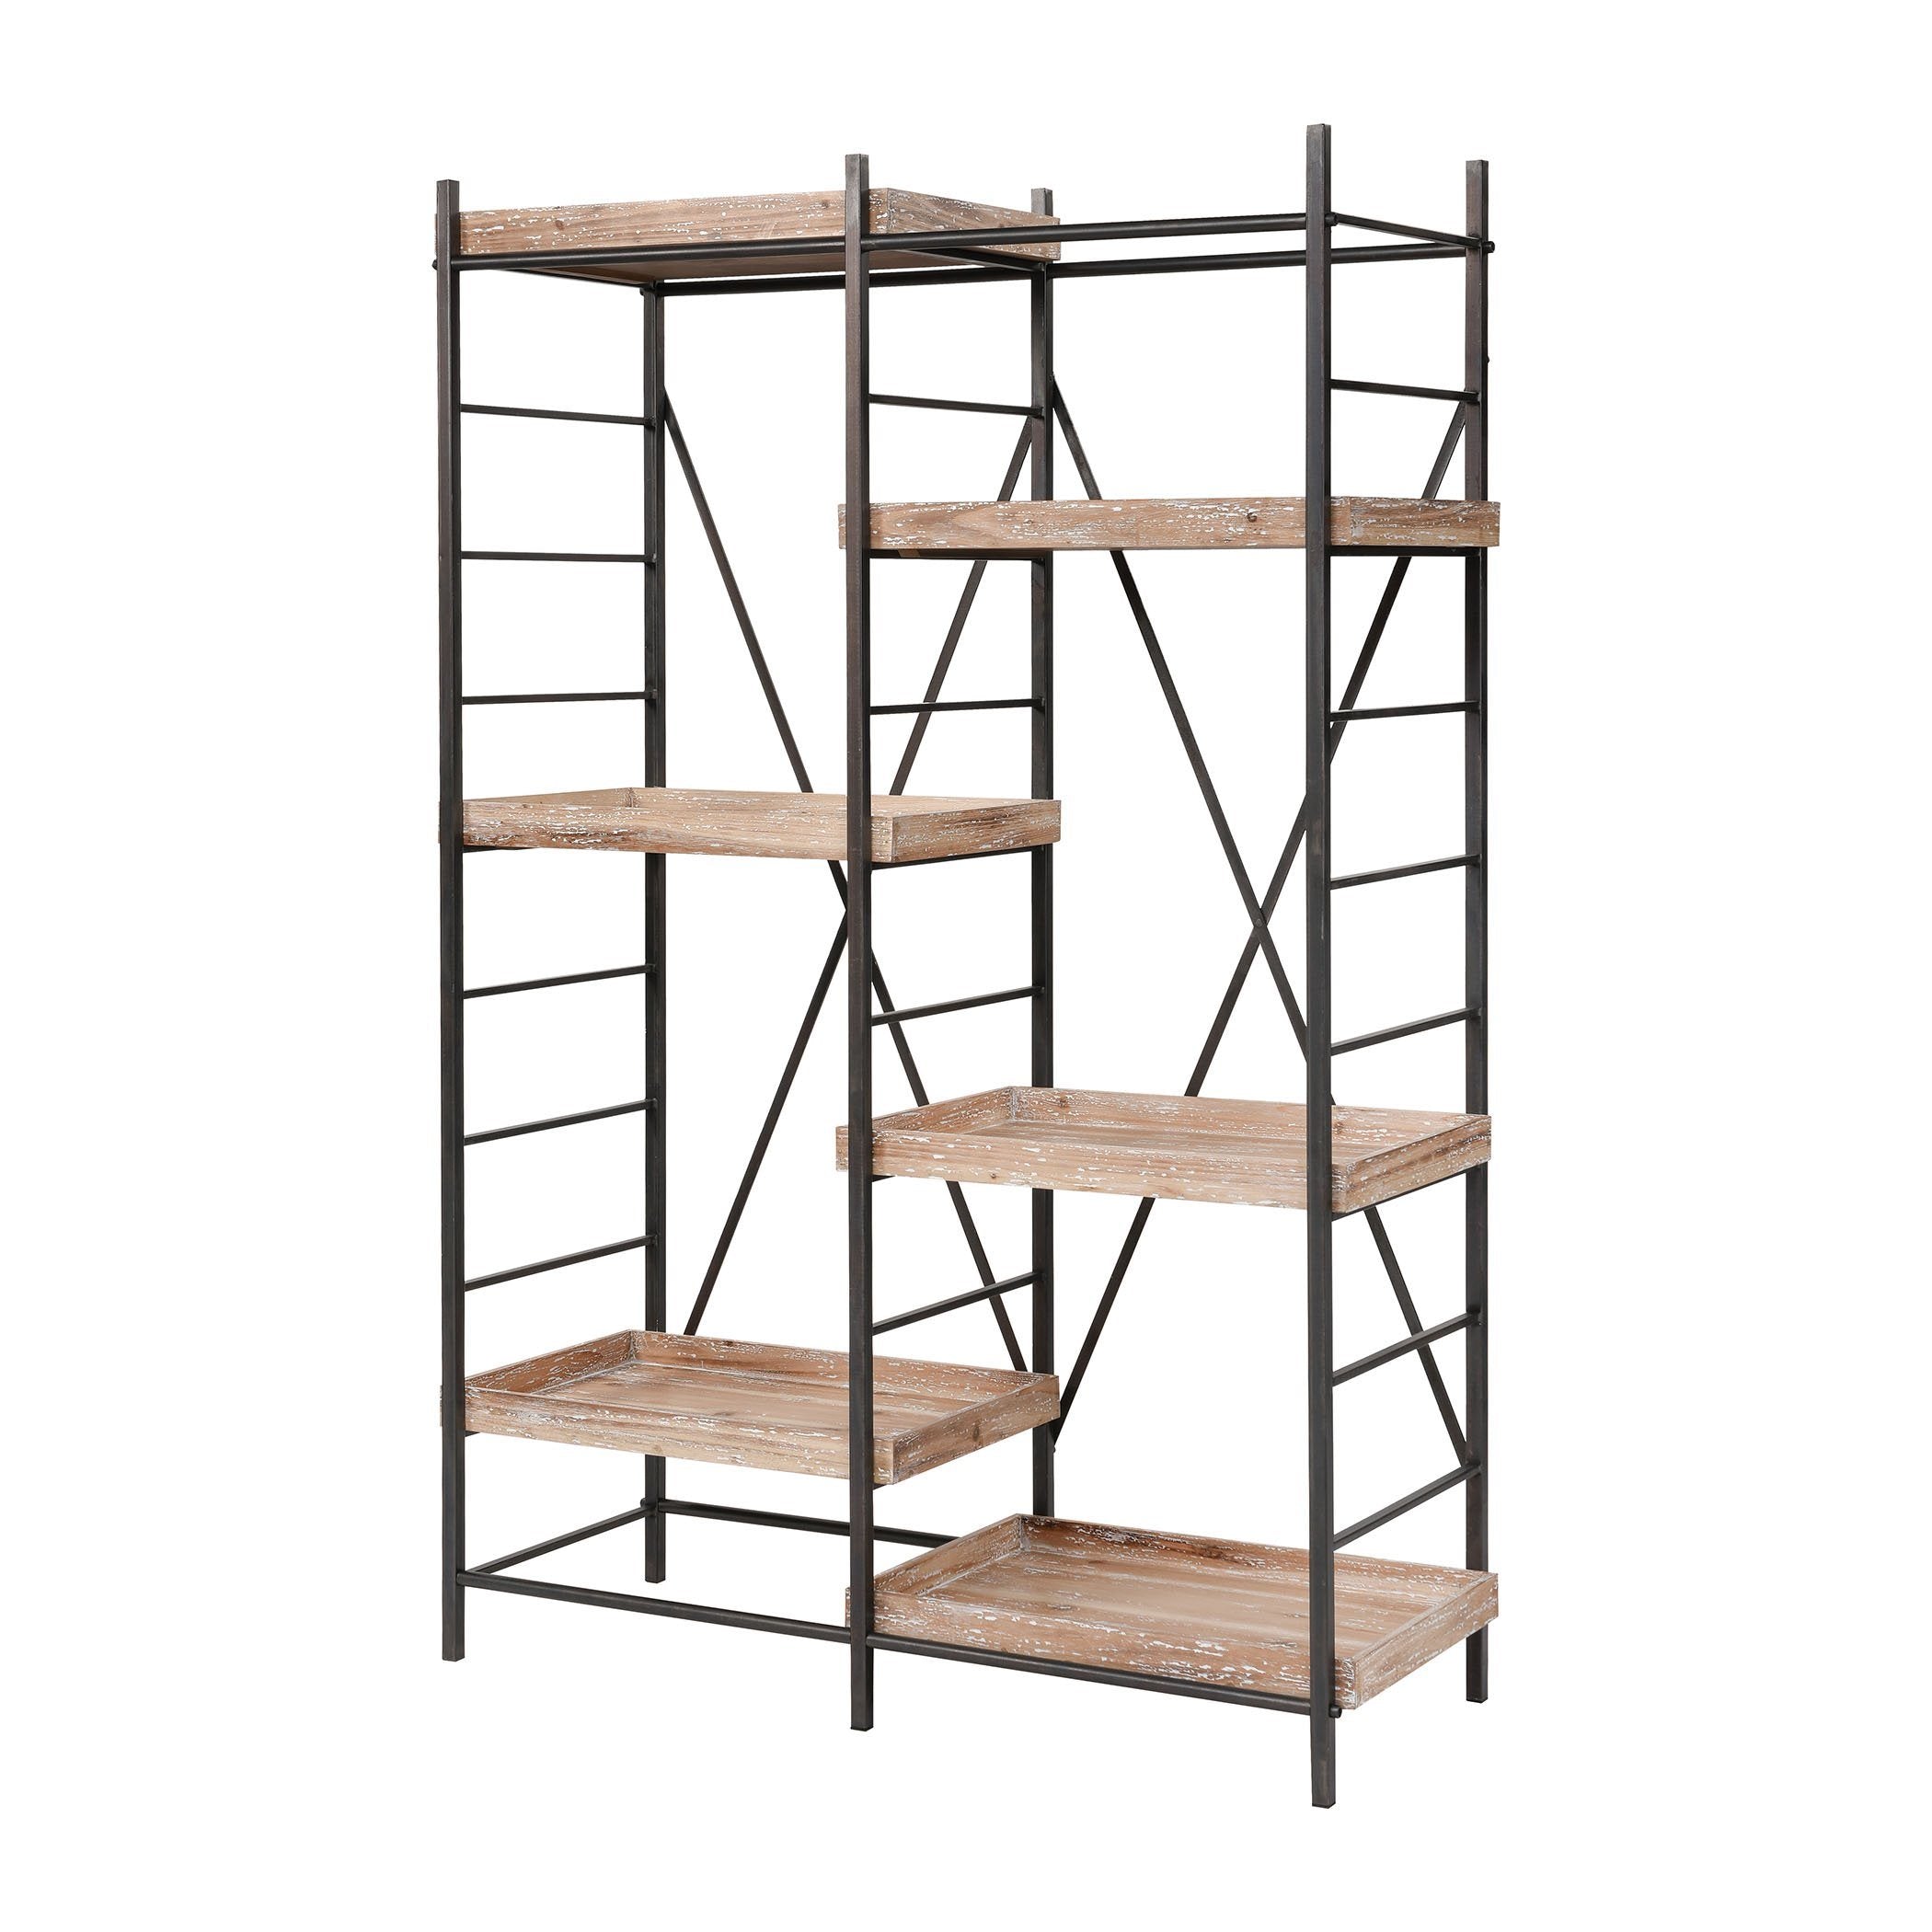 Tonka Staggered Shelving Unit in Natural Wood with White Antique and Bronze Furniture ELK Home 